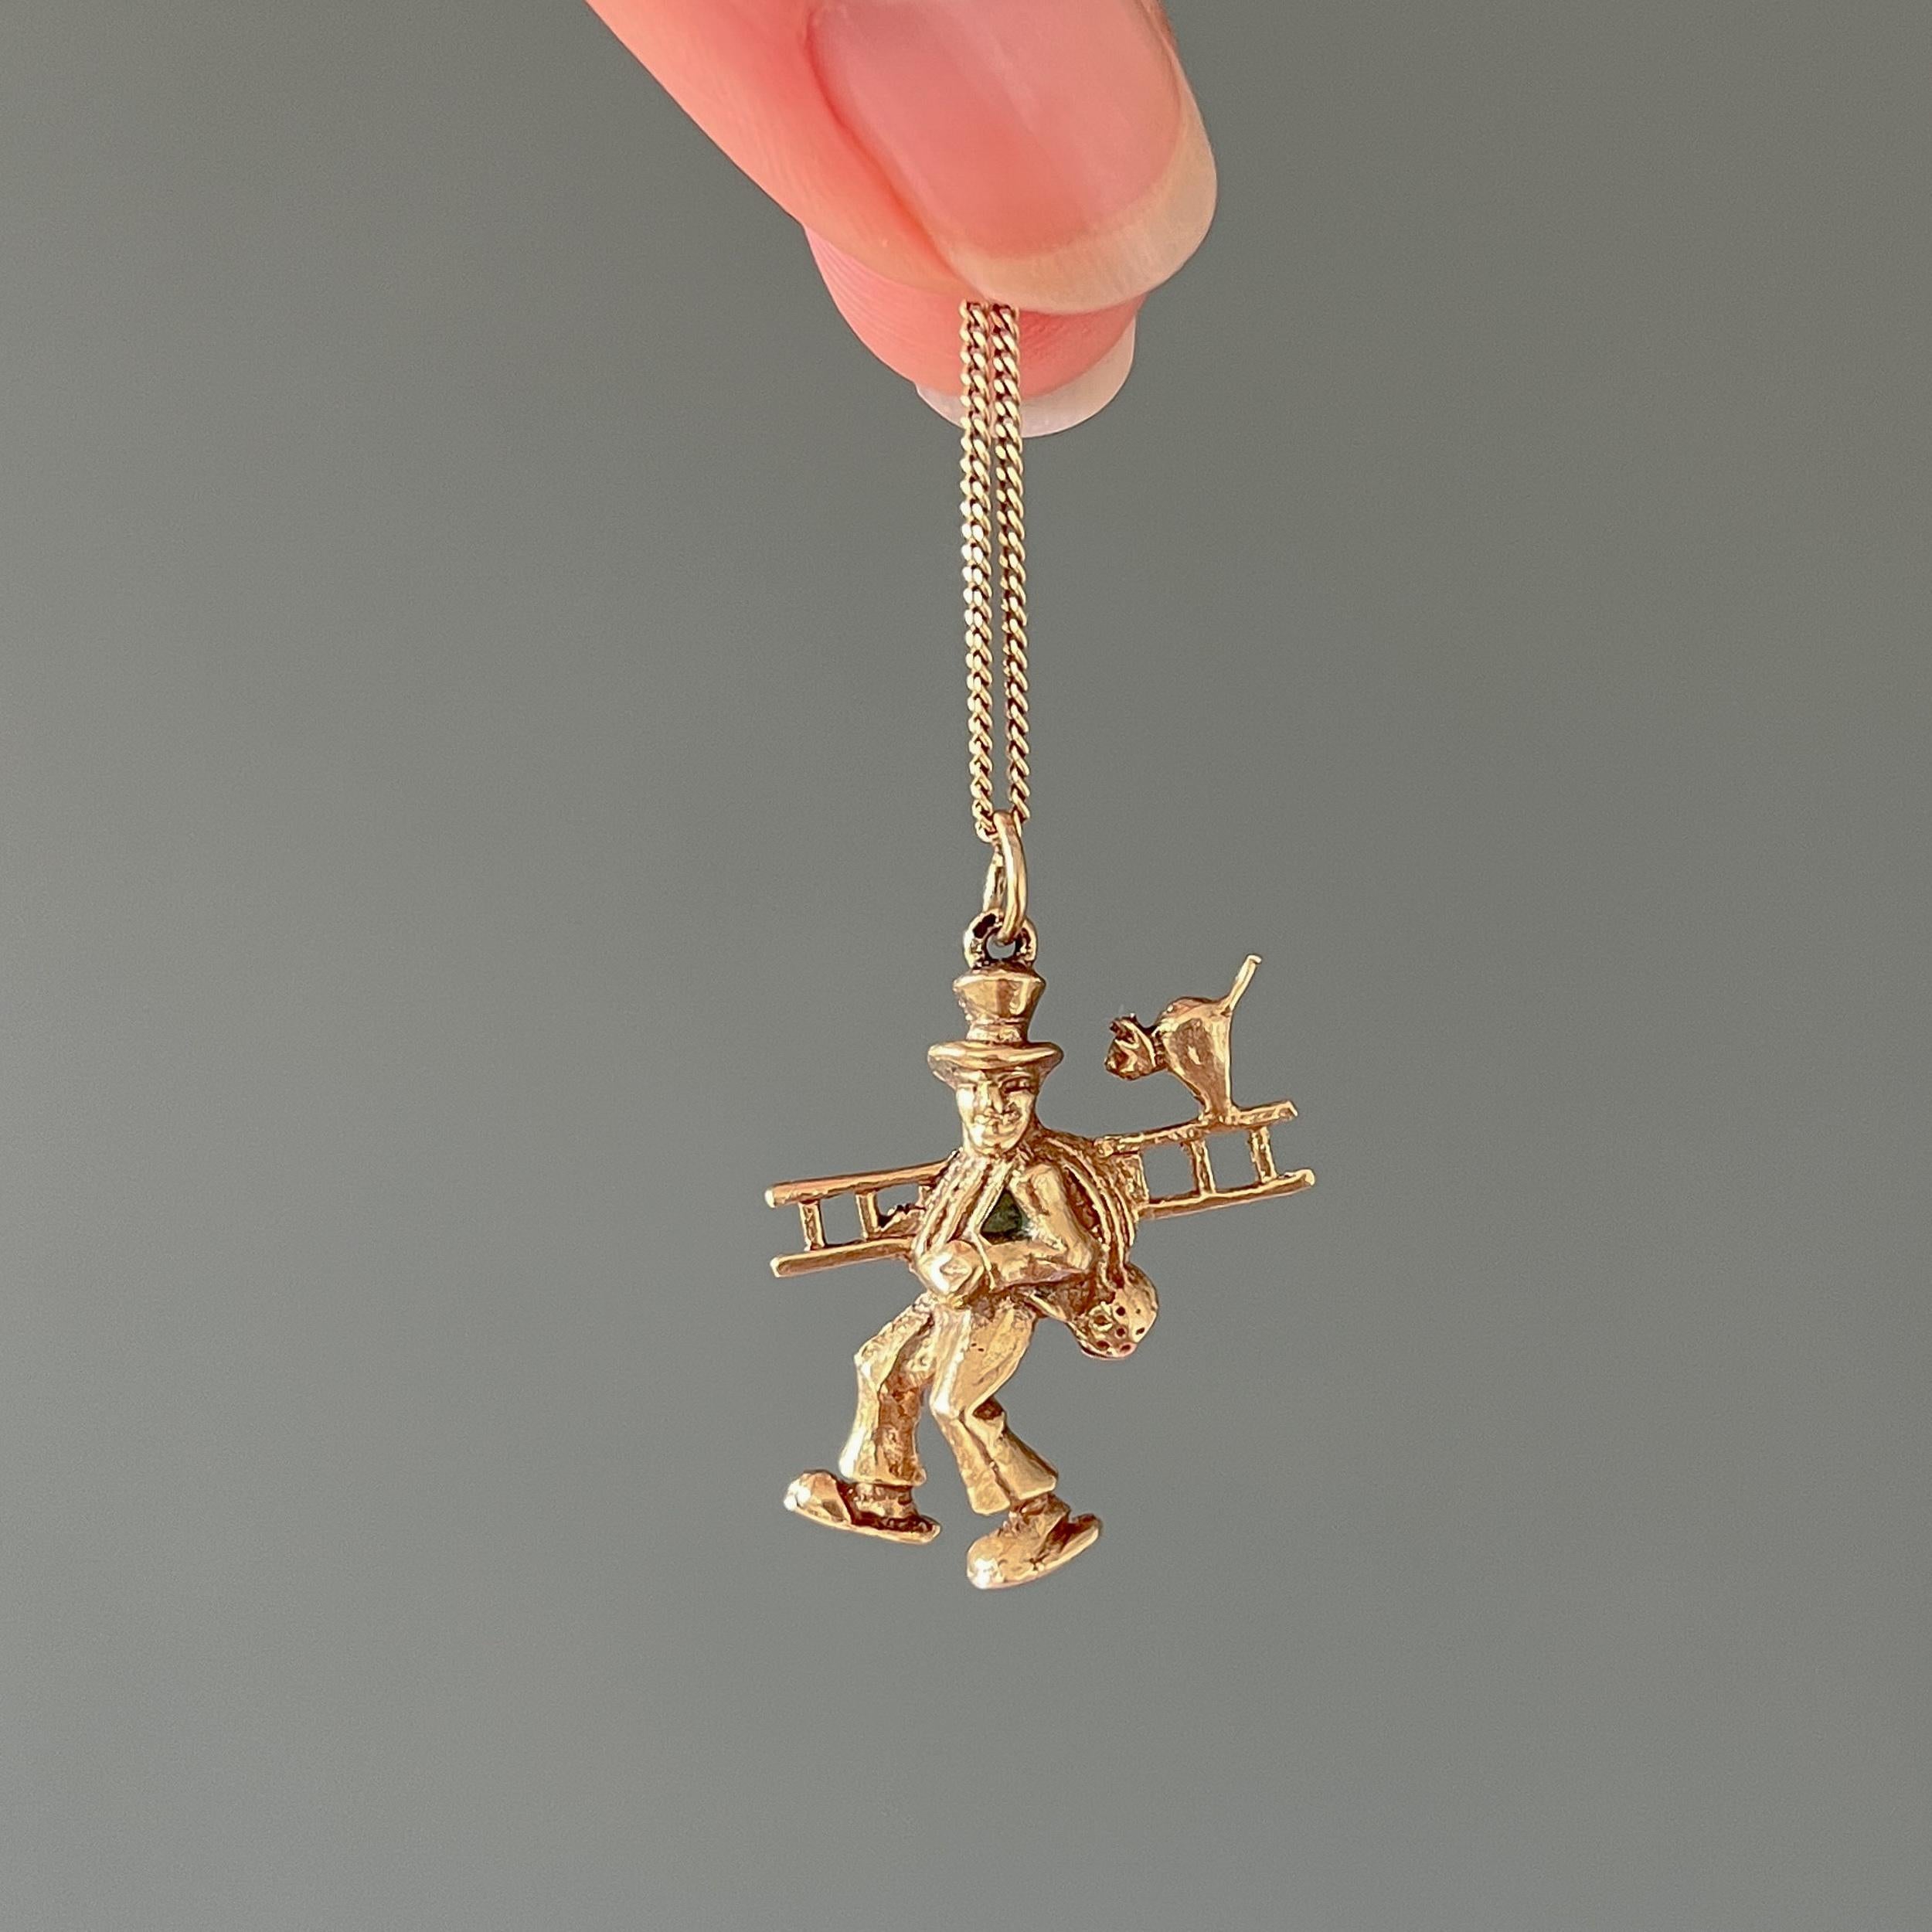 A vintage 14 karat yellow gold chimney sweep and cat charm pendant. The charm is nicely detailed with the chimney sweep, his gear and the lovely cat who hitches a ride on top of the ladder. This chimney sweep is ready to clear some soot!

In the